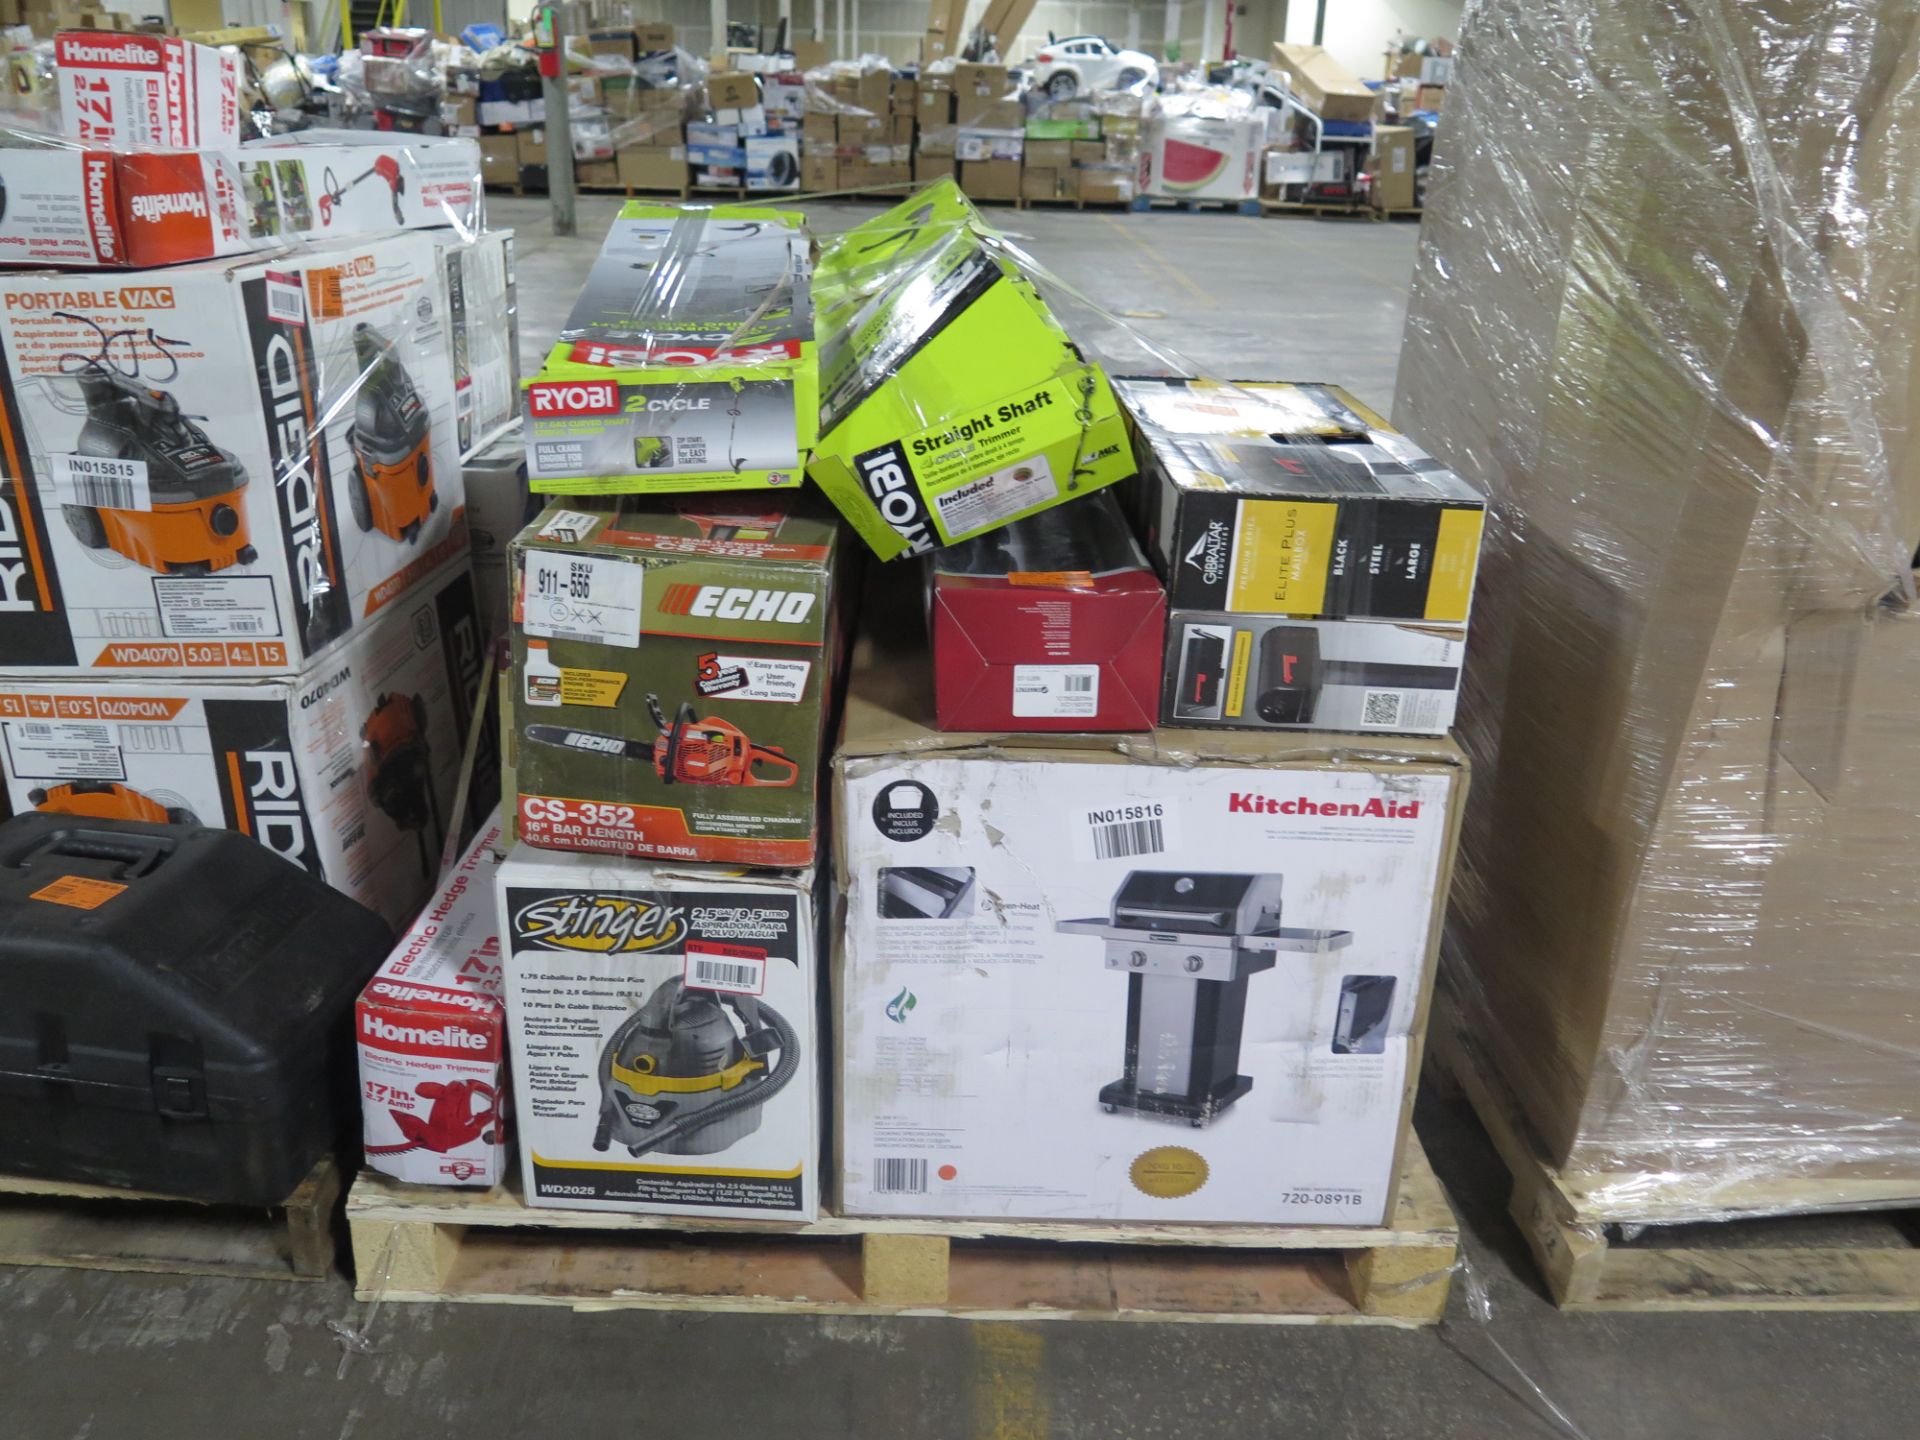 Lot of Trimmers, Wood Screws,Battery Charge,Tool Set,Cordless Chainsaw & Gas Grill with $1794 - Image 5 of 5